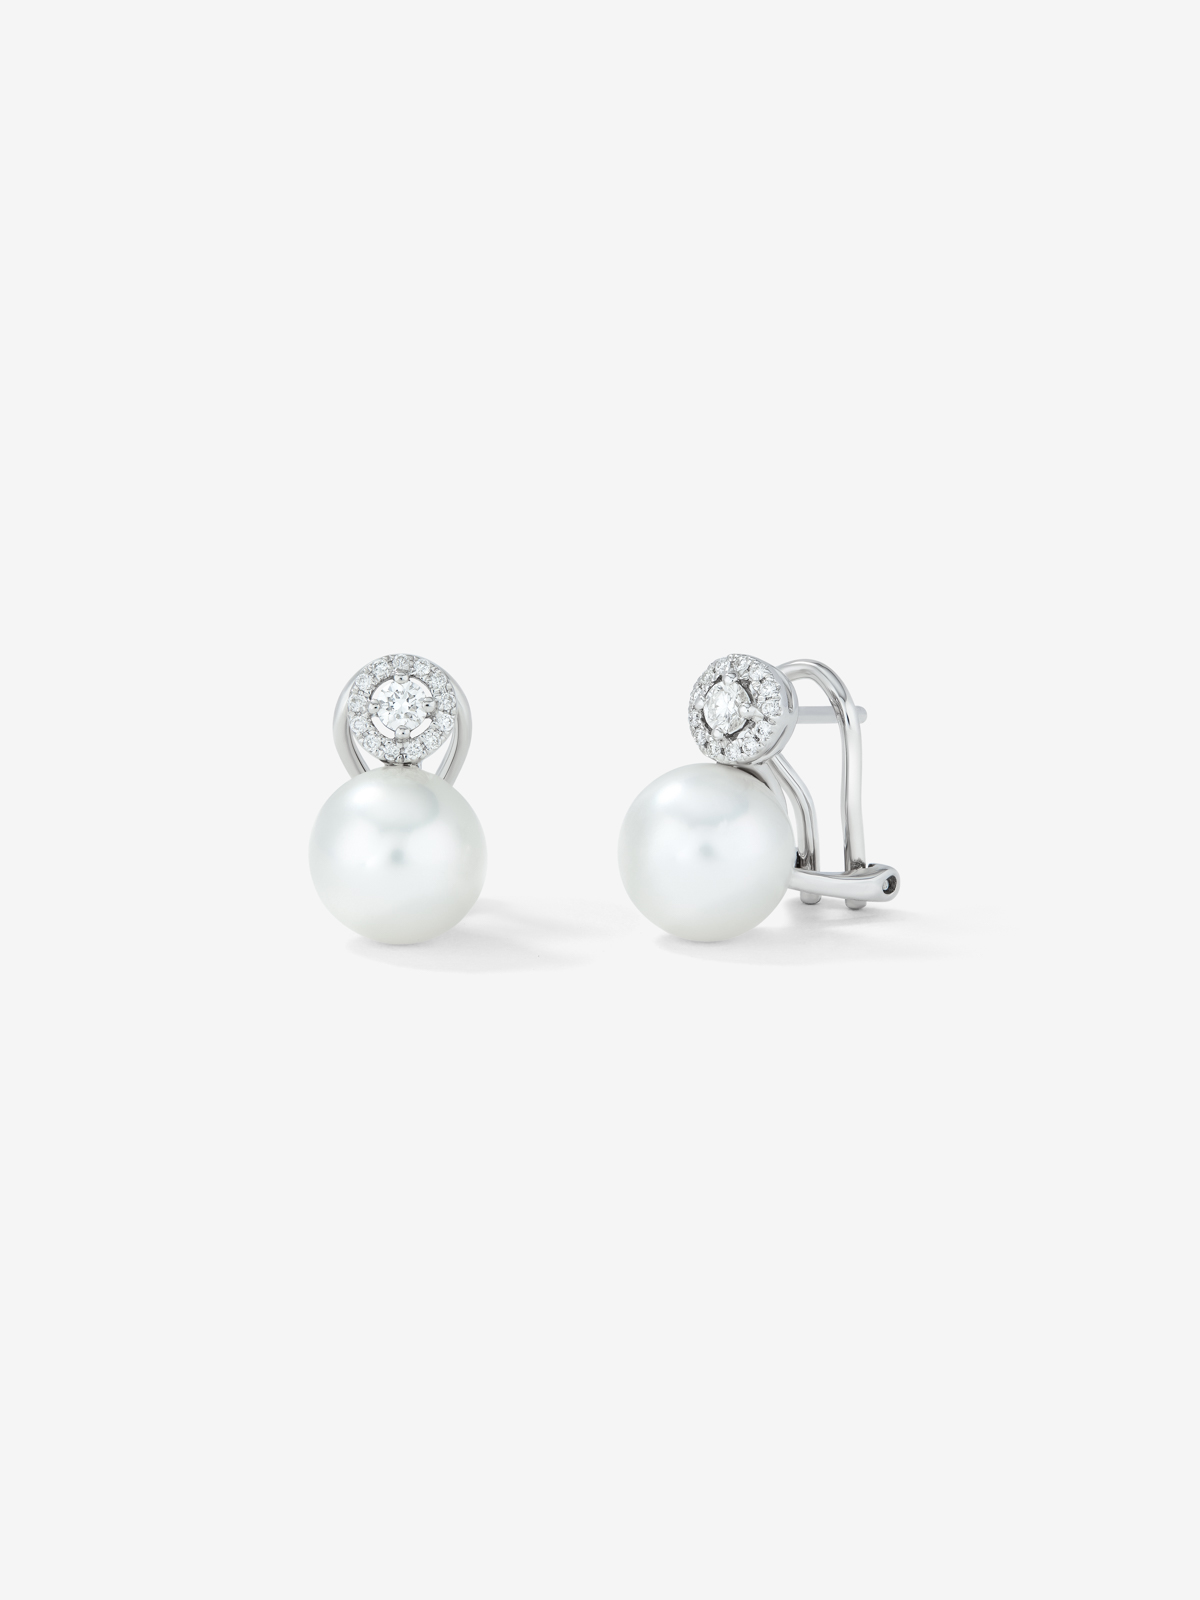 18k white gold earring with 9 mm Australian pearl pendant and diamond with omega closure.